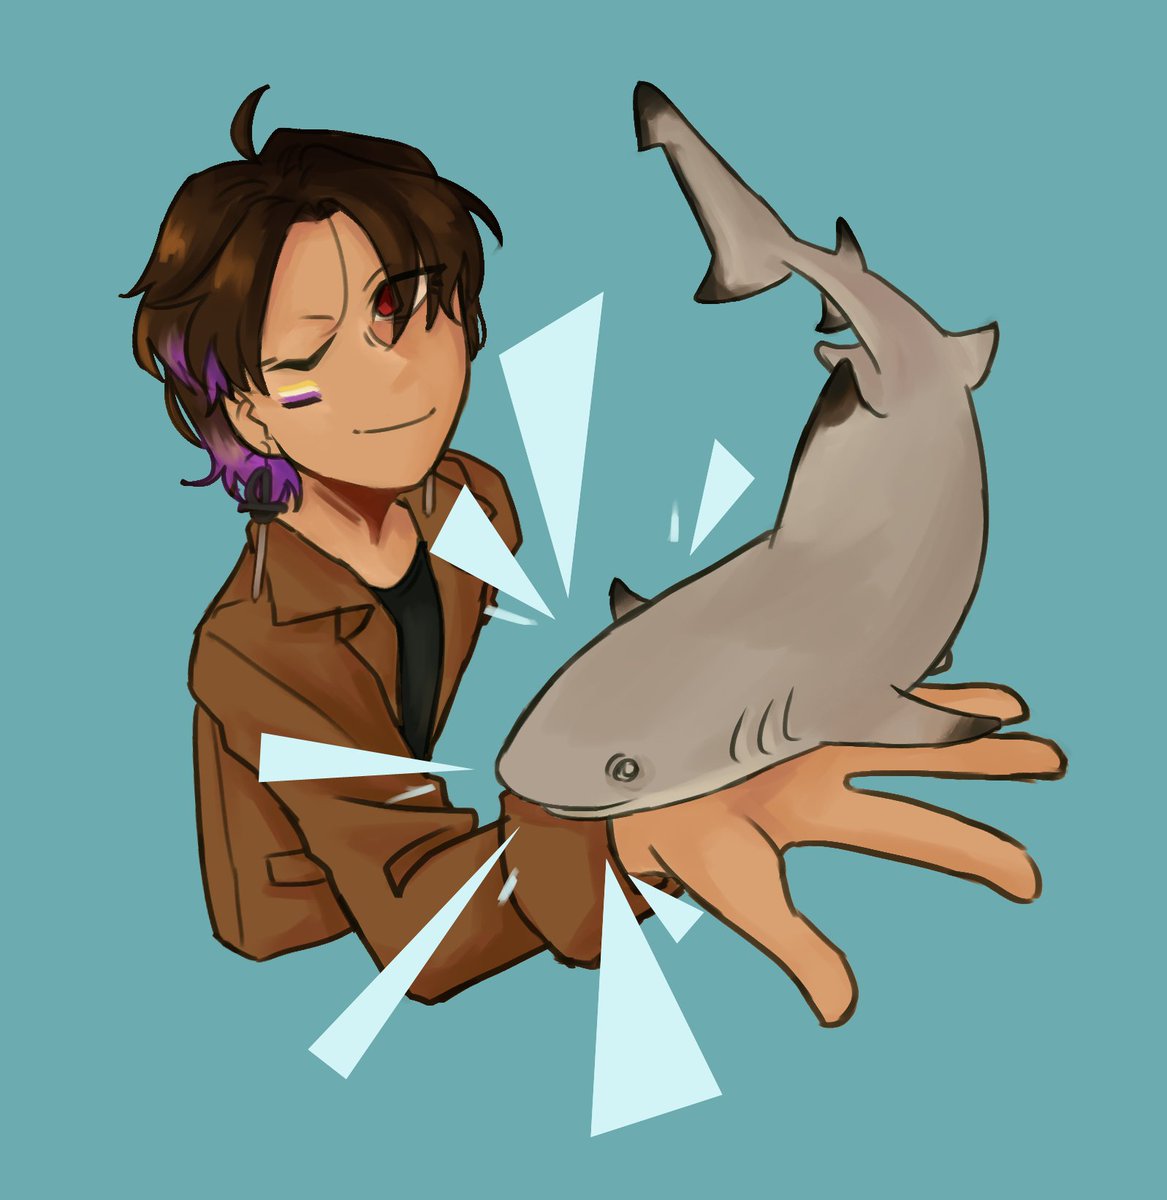 it's dangerous to go alone! take this! 🦈

#NonBinaryPeoplesDay #SharkAwarenessDay